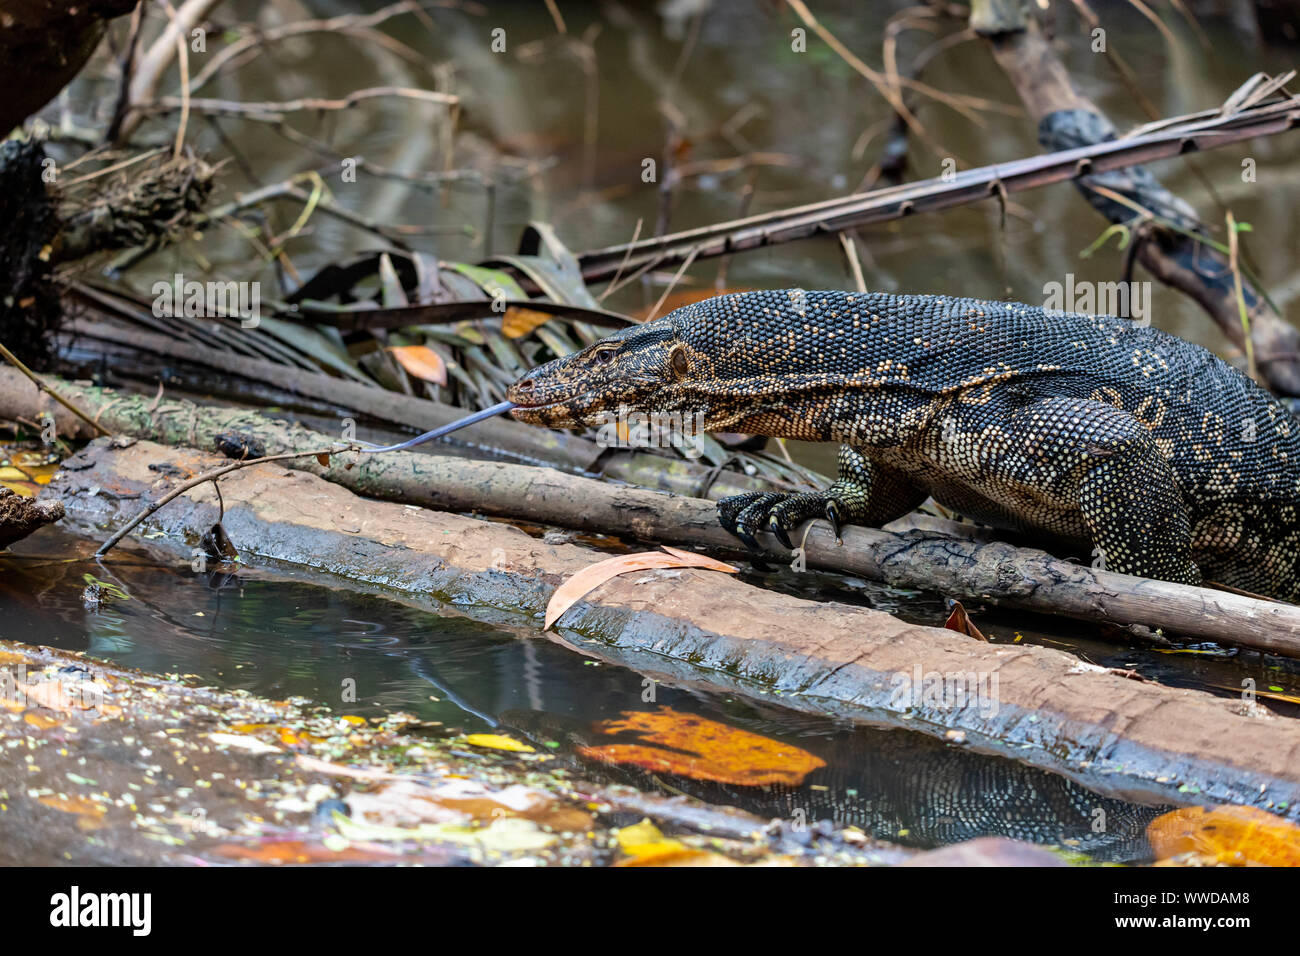 Head detail of a large Malayan Water Monitor or Rice Lizard, Varanus salvator, climbing out of water onto a submerged tree trunk flicking its forked t Stock Photo